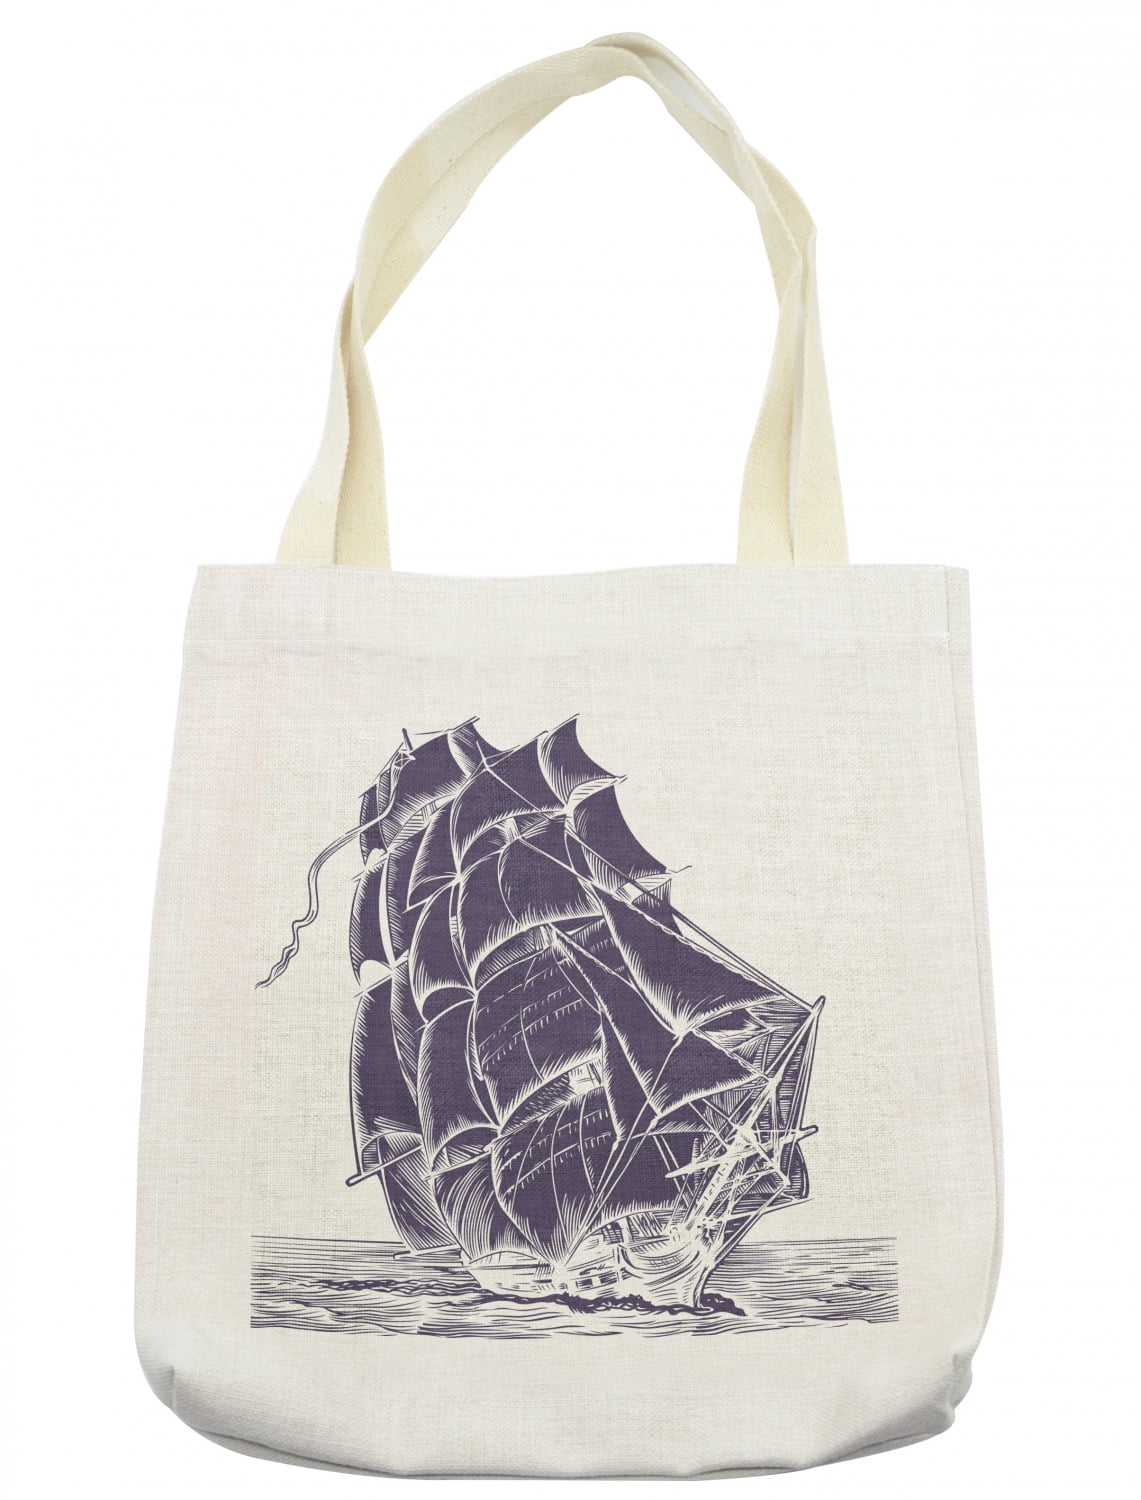 Nautical Tote Bag, Old Sail Boat in the Ocean on White Background ...